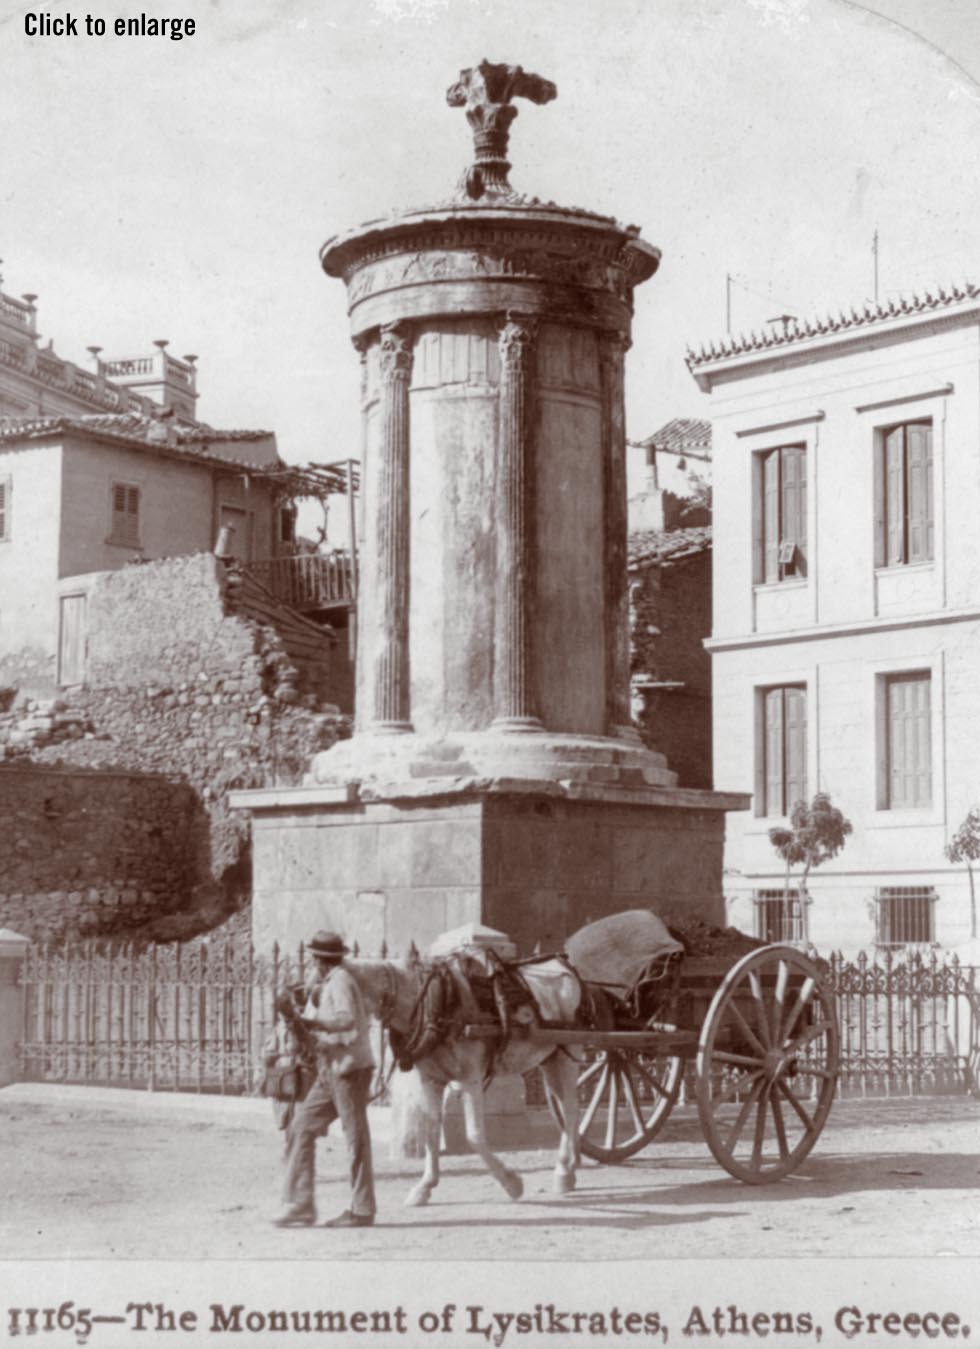 The monument of Lyskrates in Athens 1900